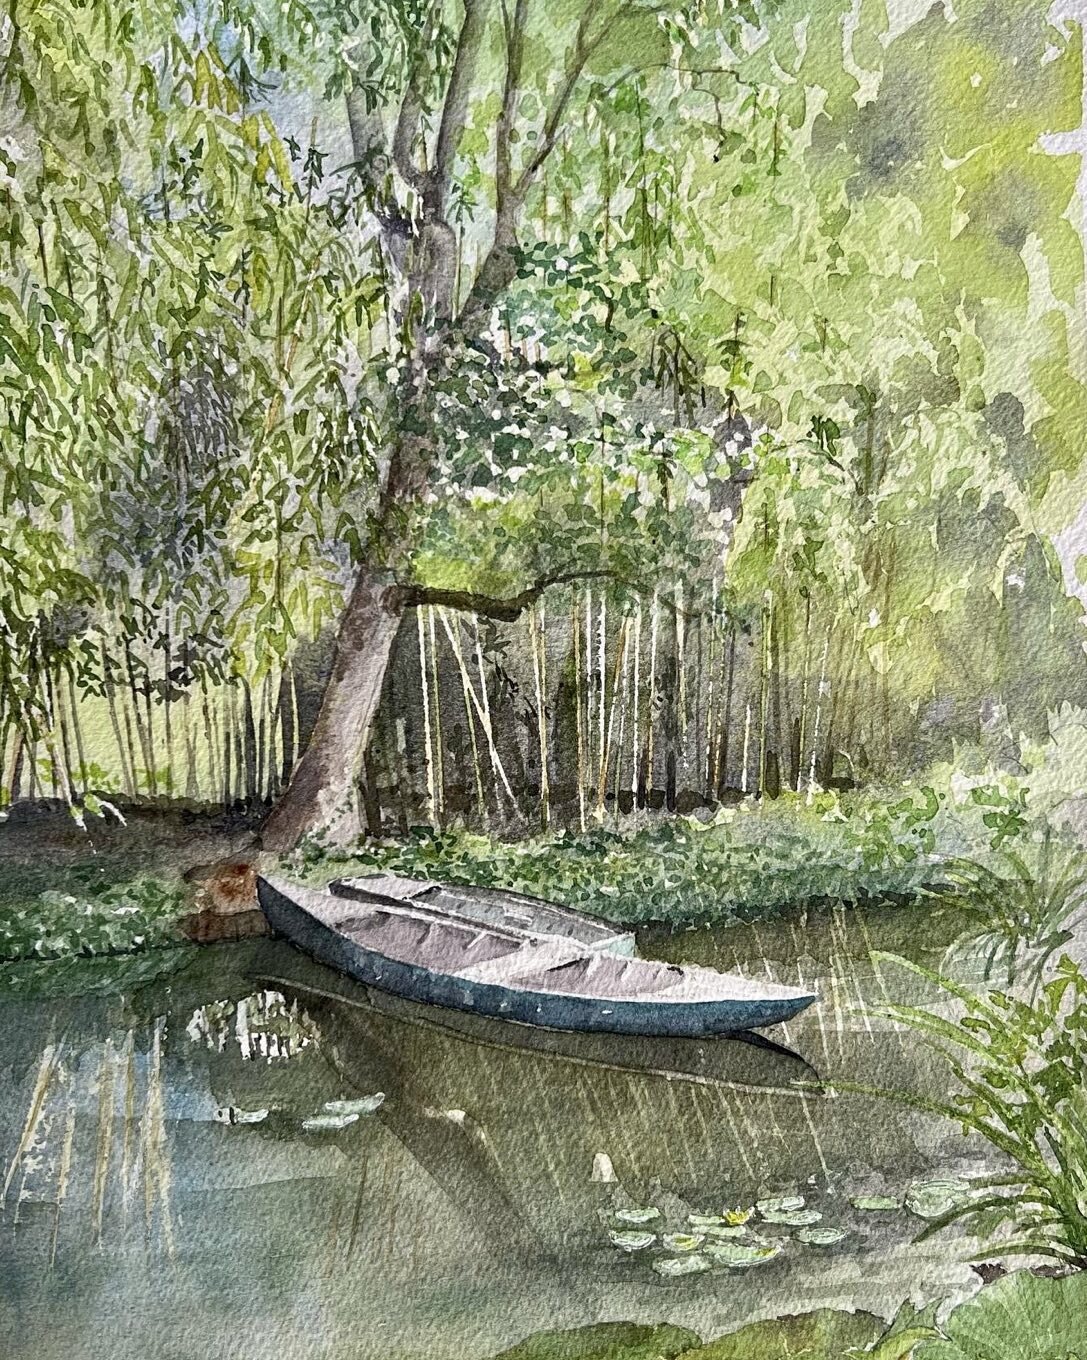 Monet's Boat at Giverney🪷 
The visit to Monet's Garden was magical. I painted this after returning home. 
Now exhibited at Here Now by @artnetdlr @waltersdunlaoighre

.
.
#artnetdlr
#waltersdunlaoighre
#watercolour
#watercolourpainting
#watercolours